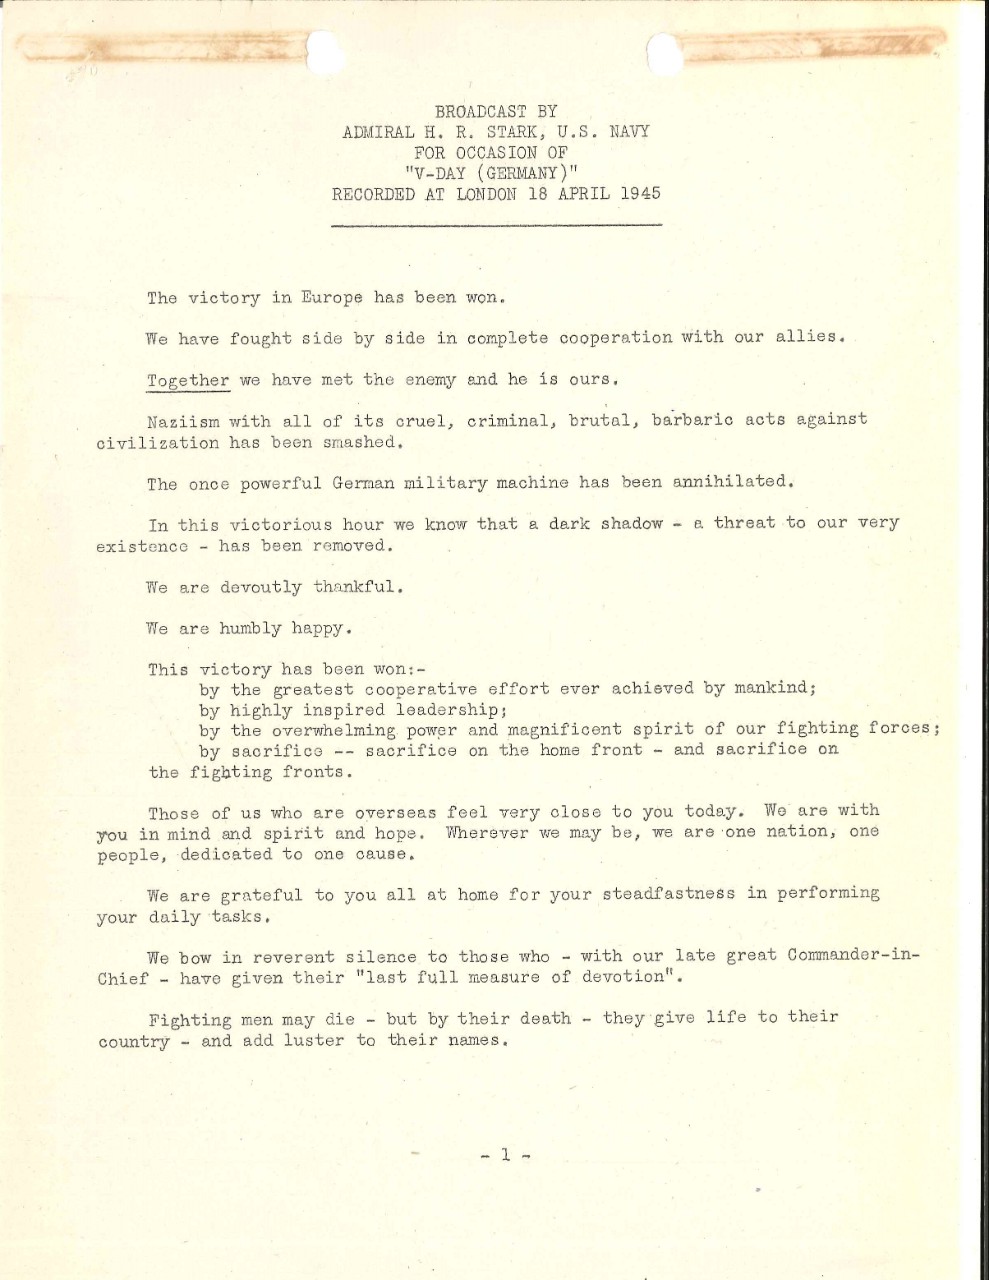 VE Day radio broadcast by Admiral Harold Stark, April 18, 1945, page 1